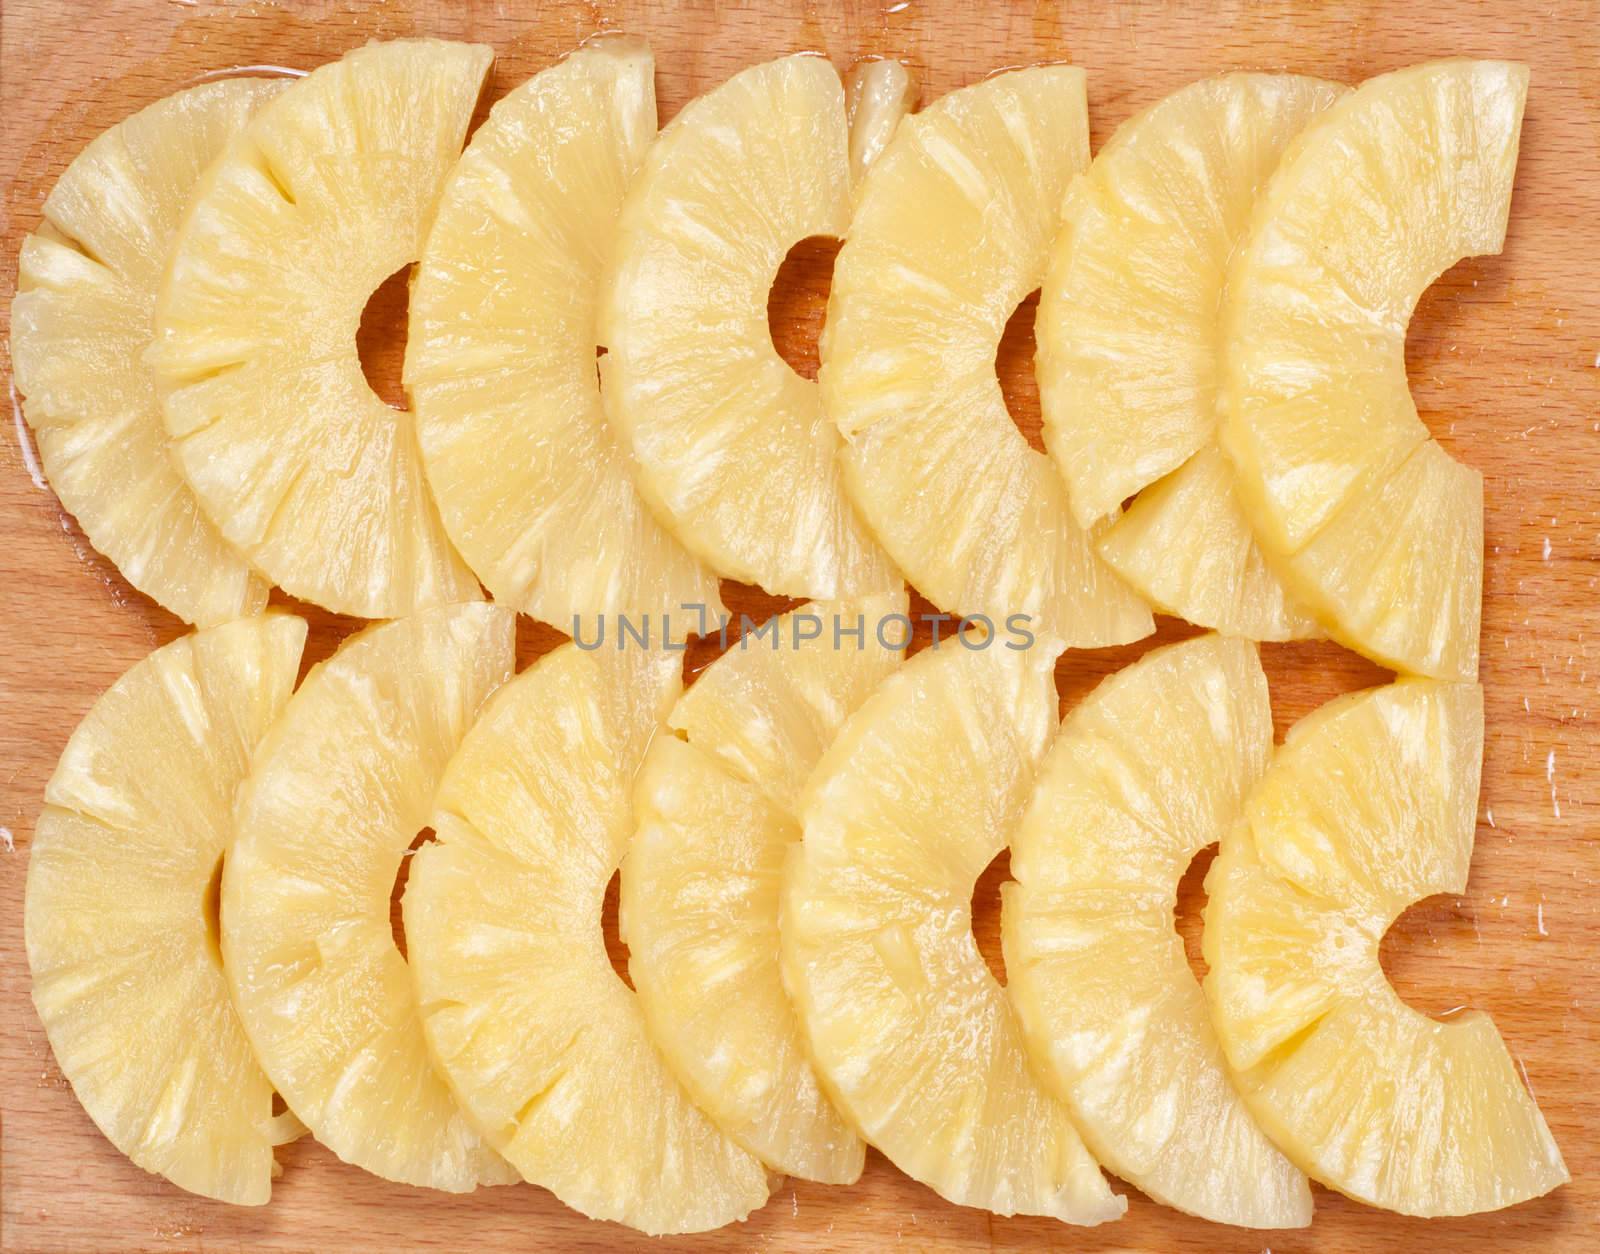 pineapple slices on the board by zokov